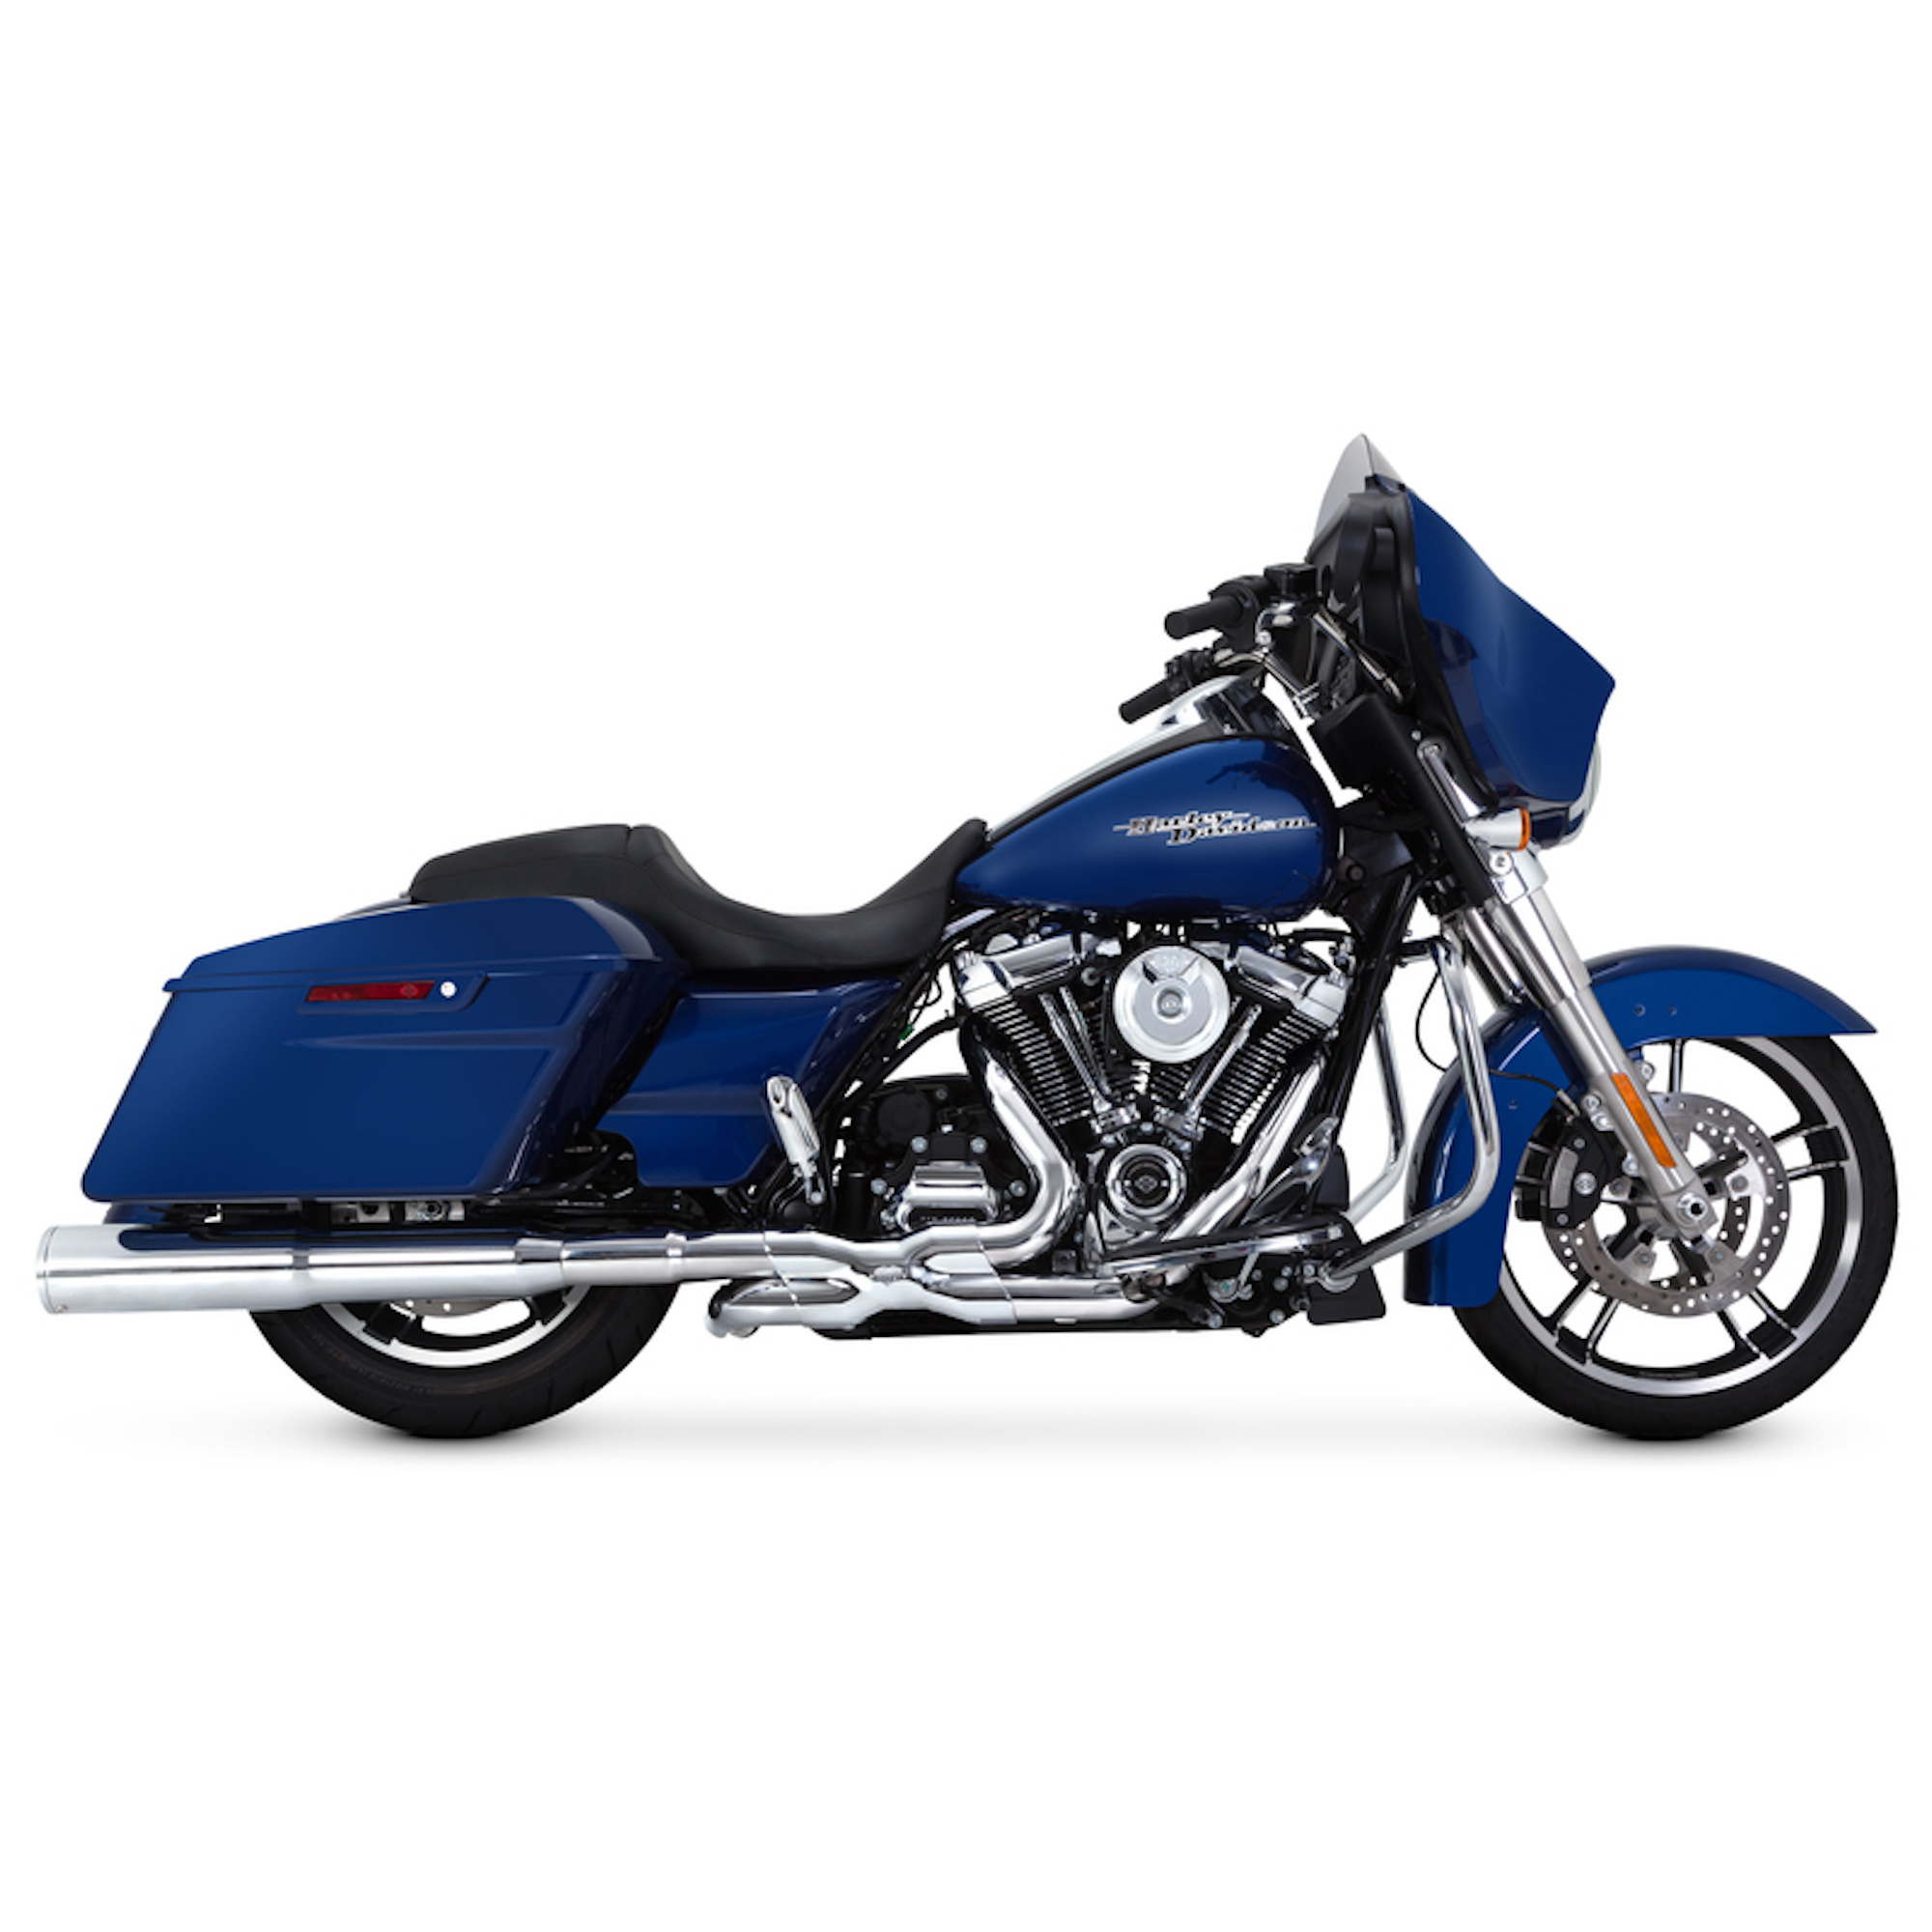 The Vance & Hines PCX Power Duals system. Media sourced from the relevant press release.